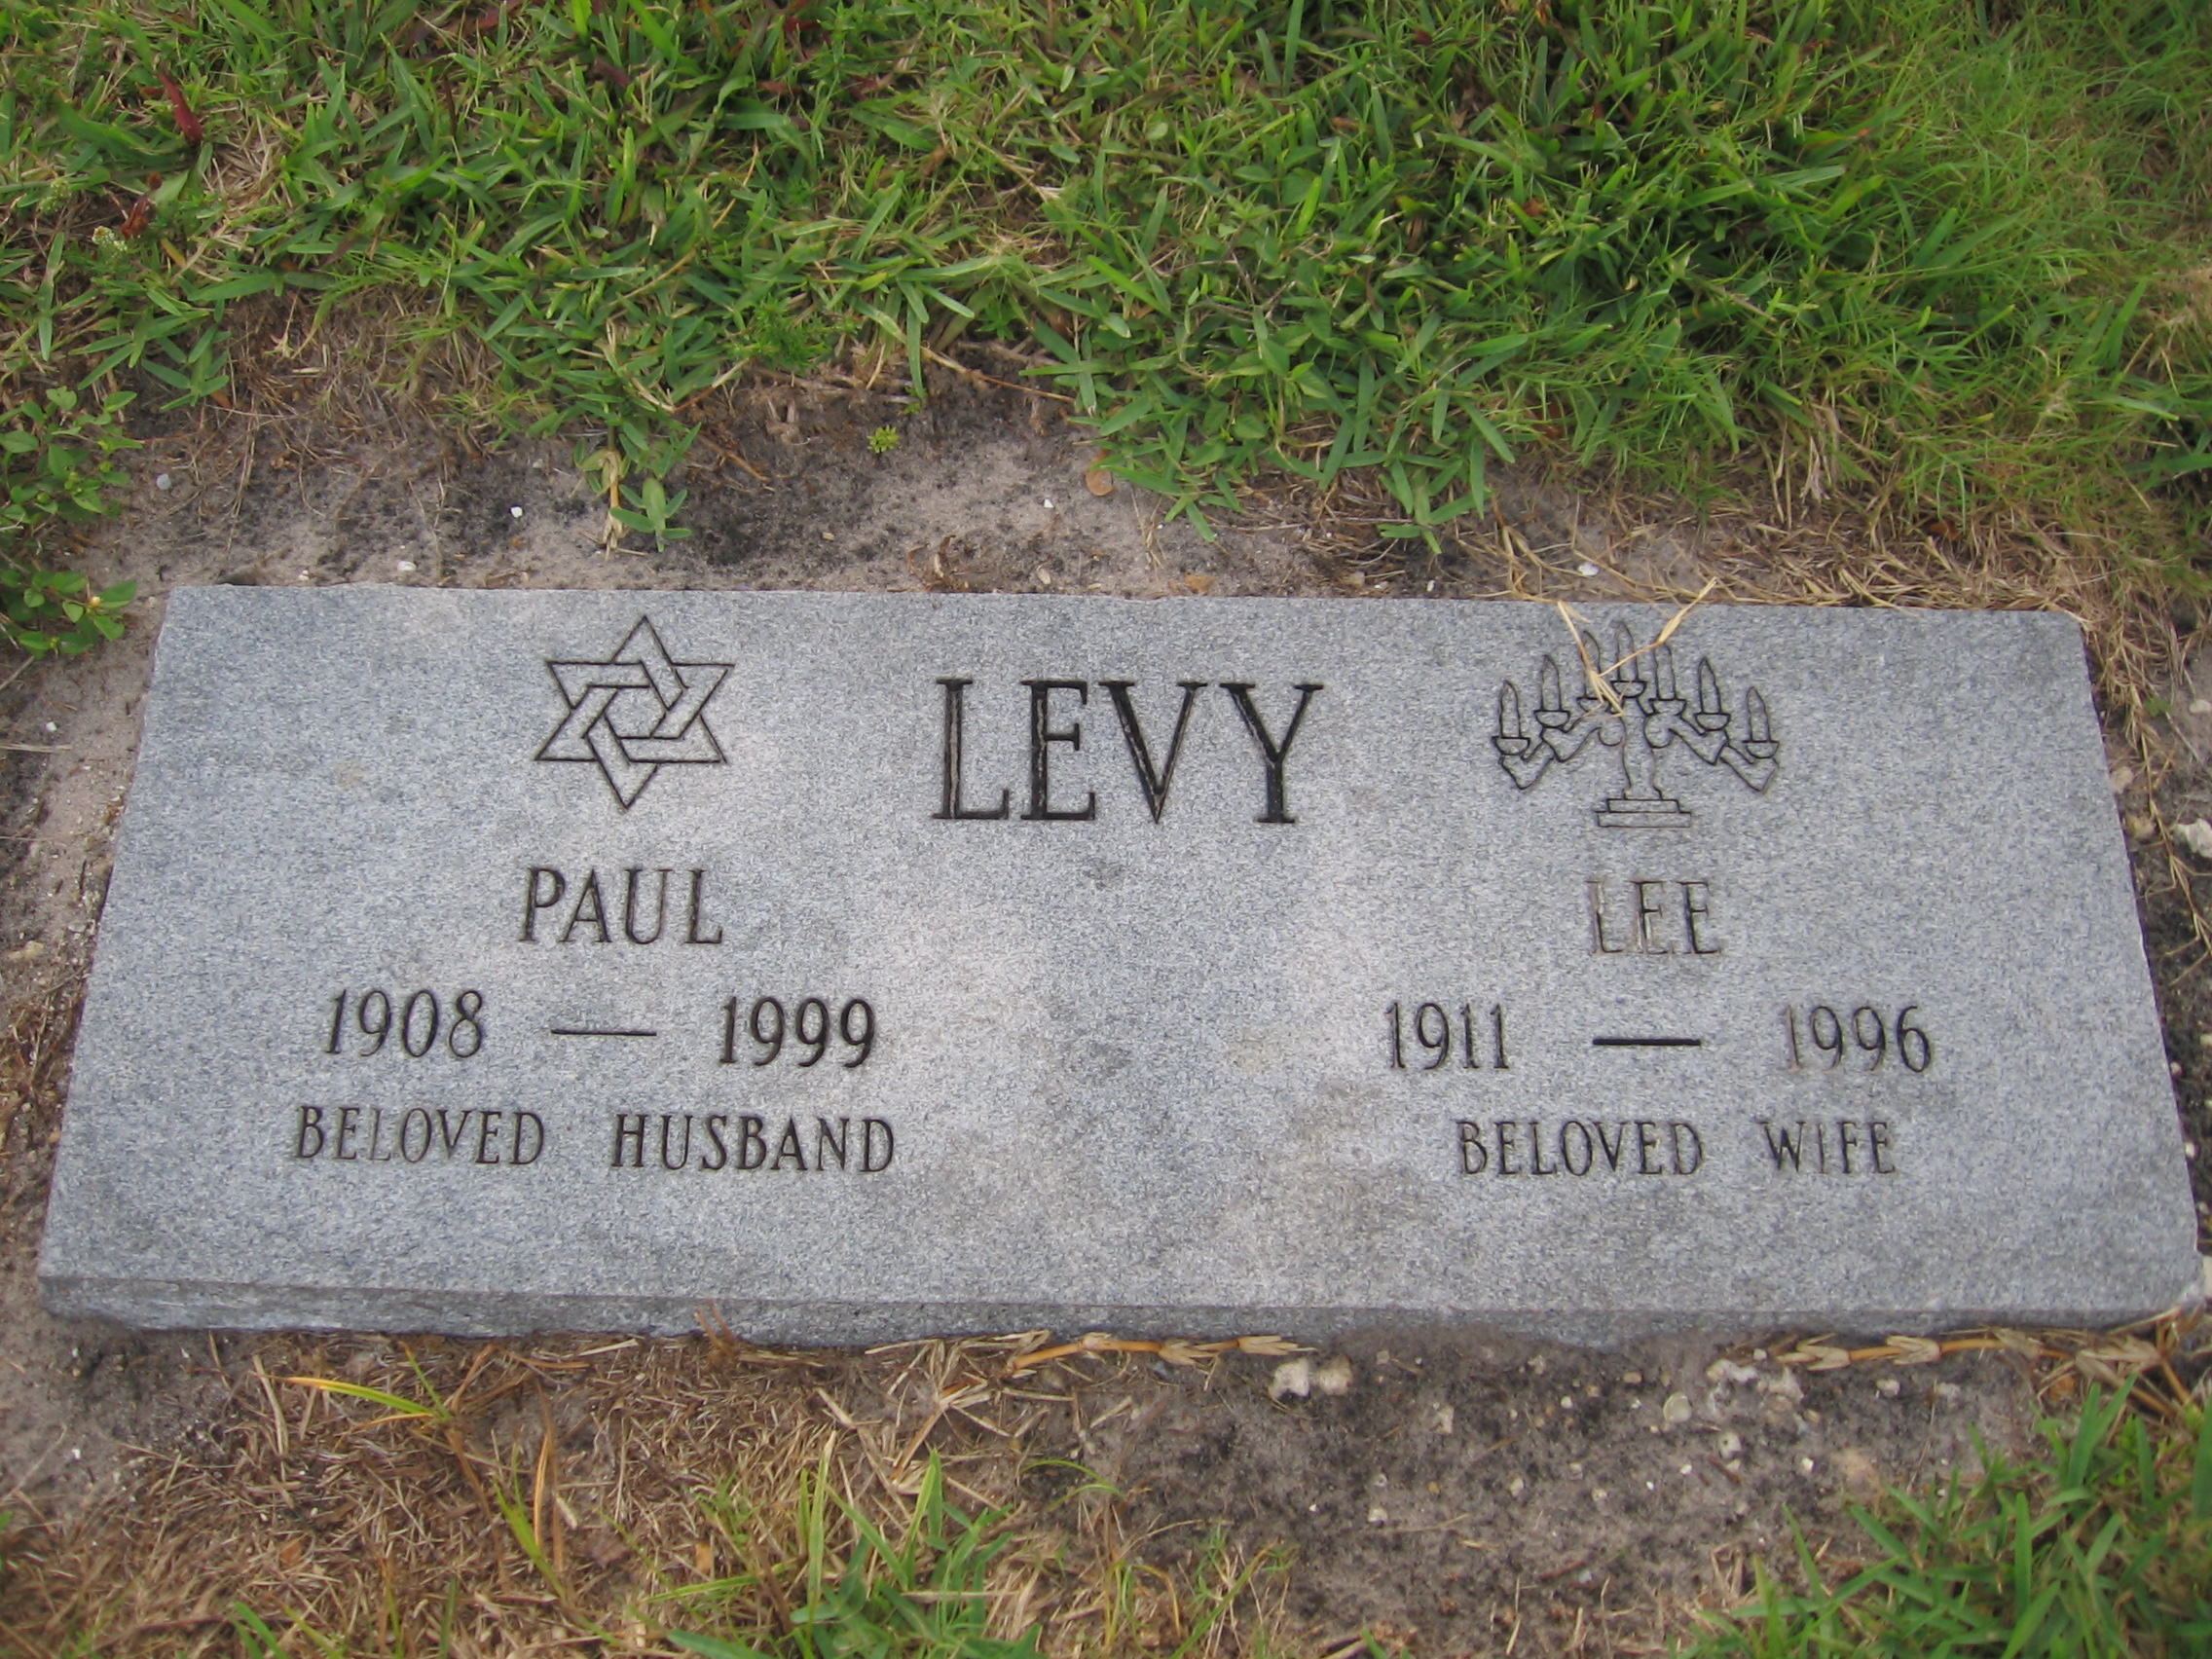 Lee Levy